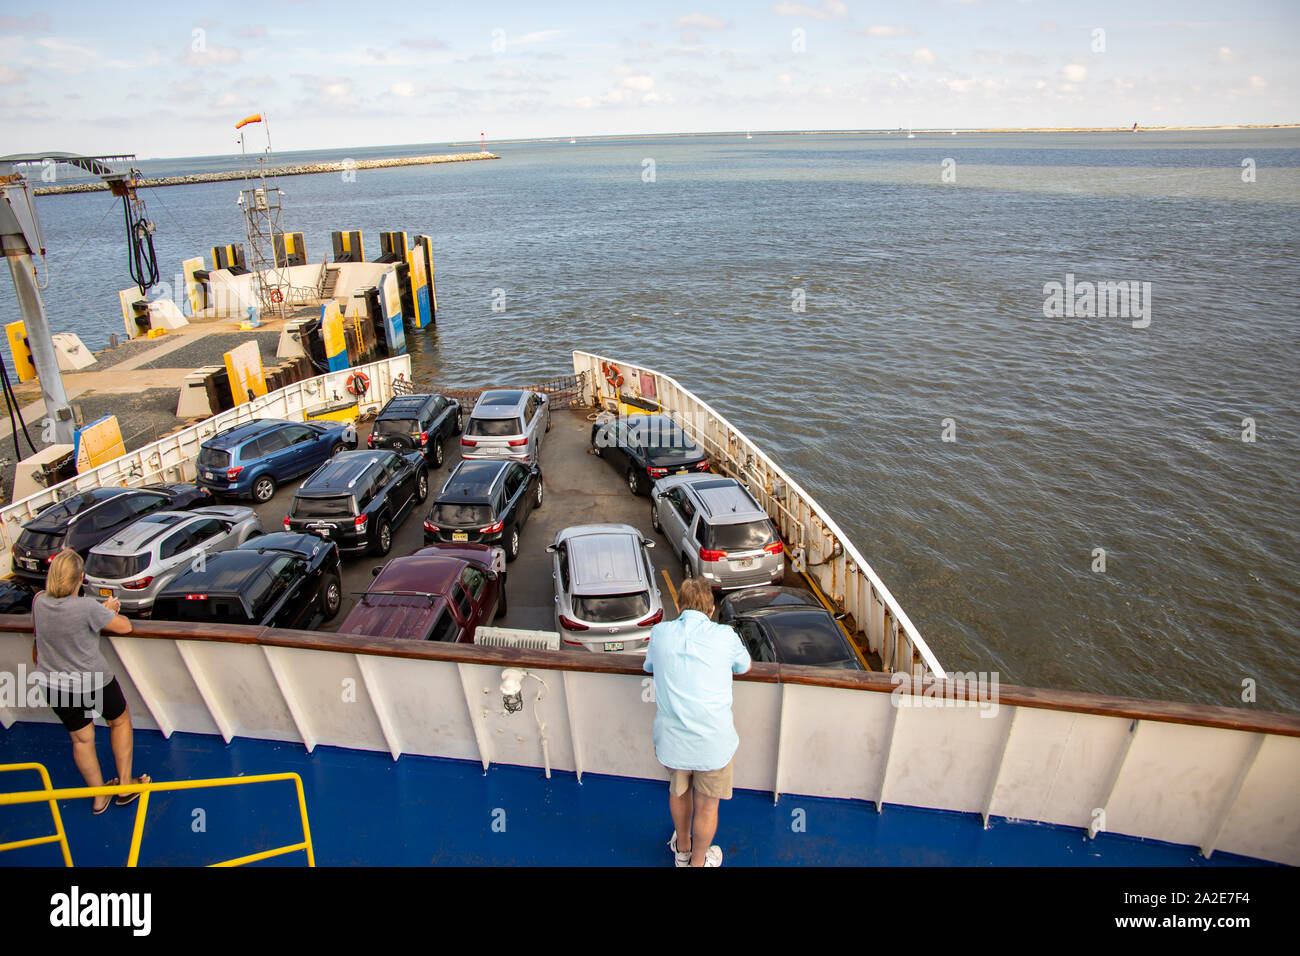 Lewes, Delaware - September 27, 2019 :  Passengers and cars on Cape May - Lewes ferry boat at dock. Stock Photo